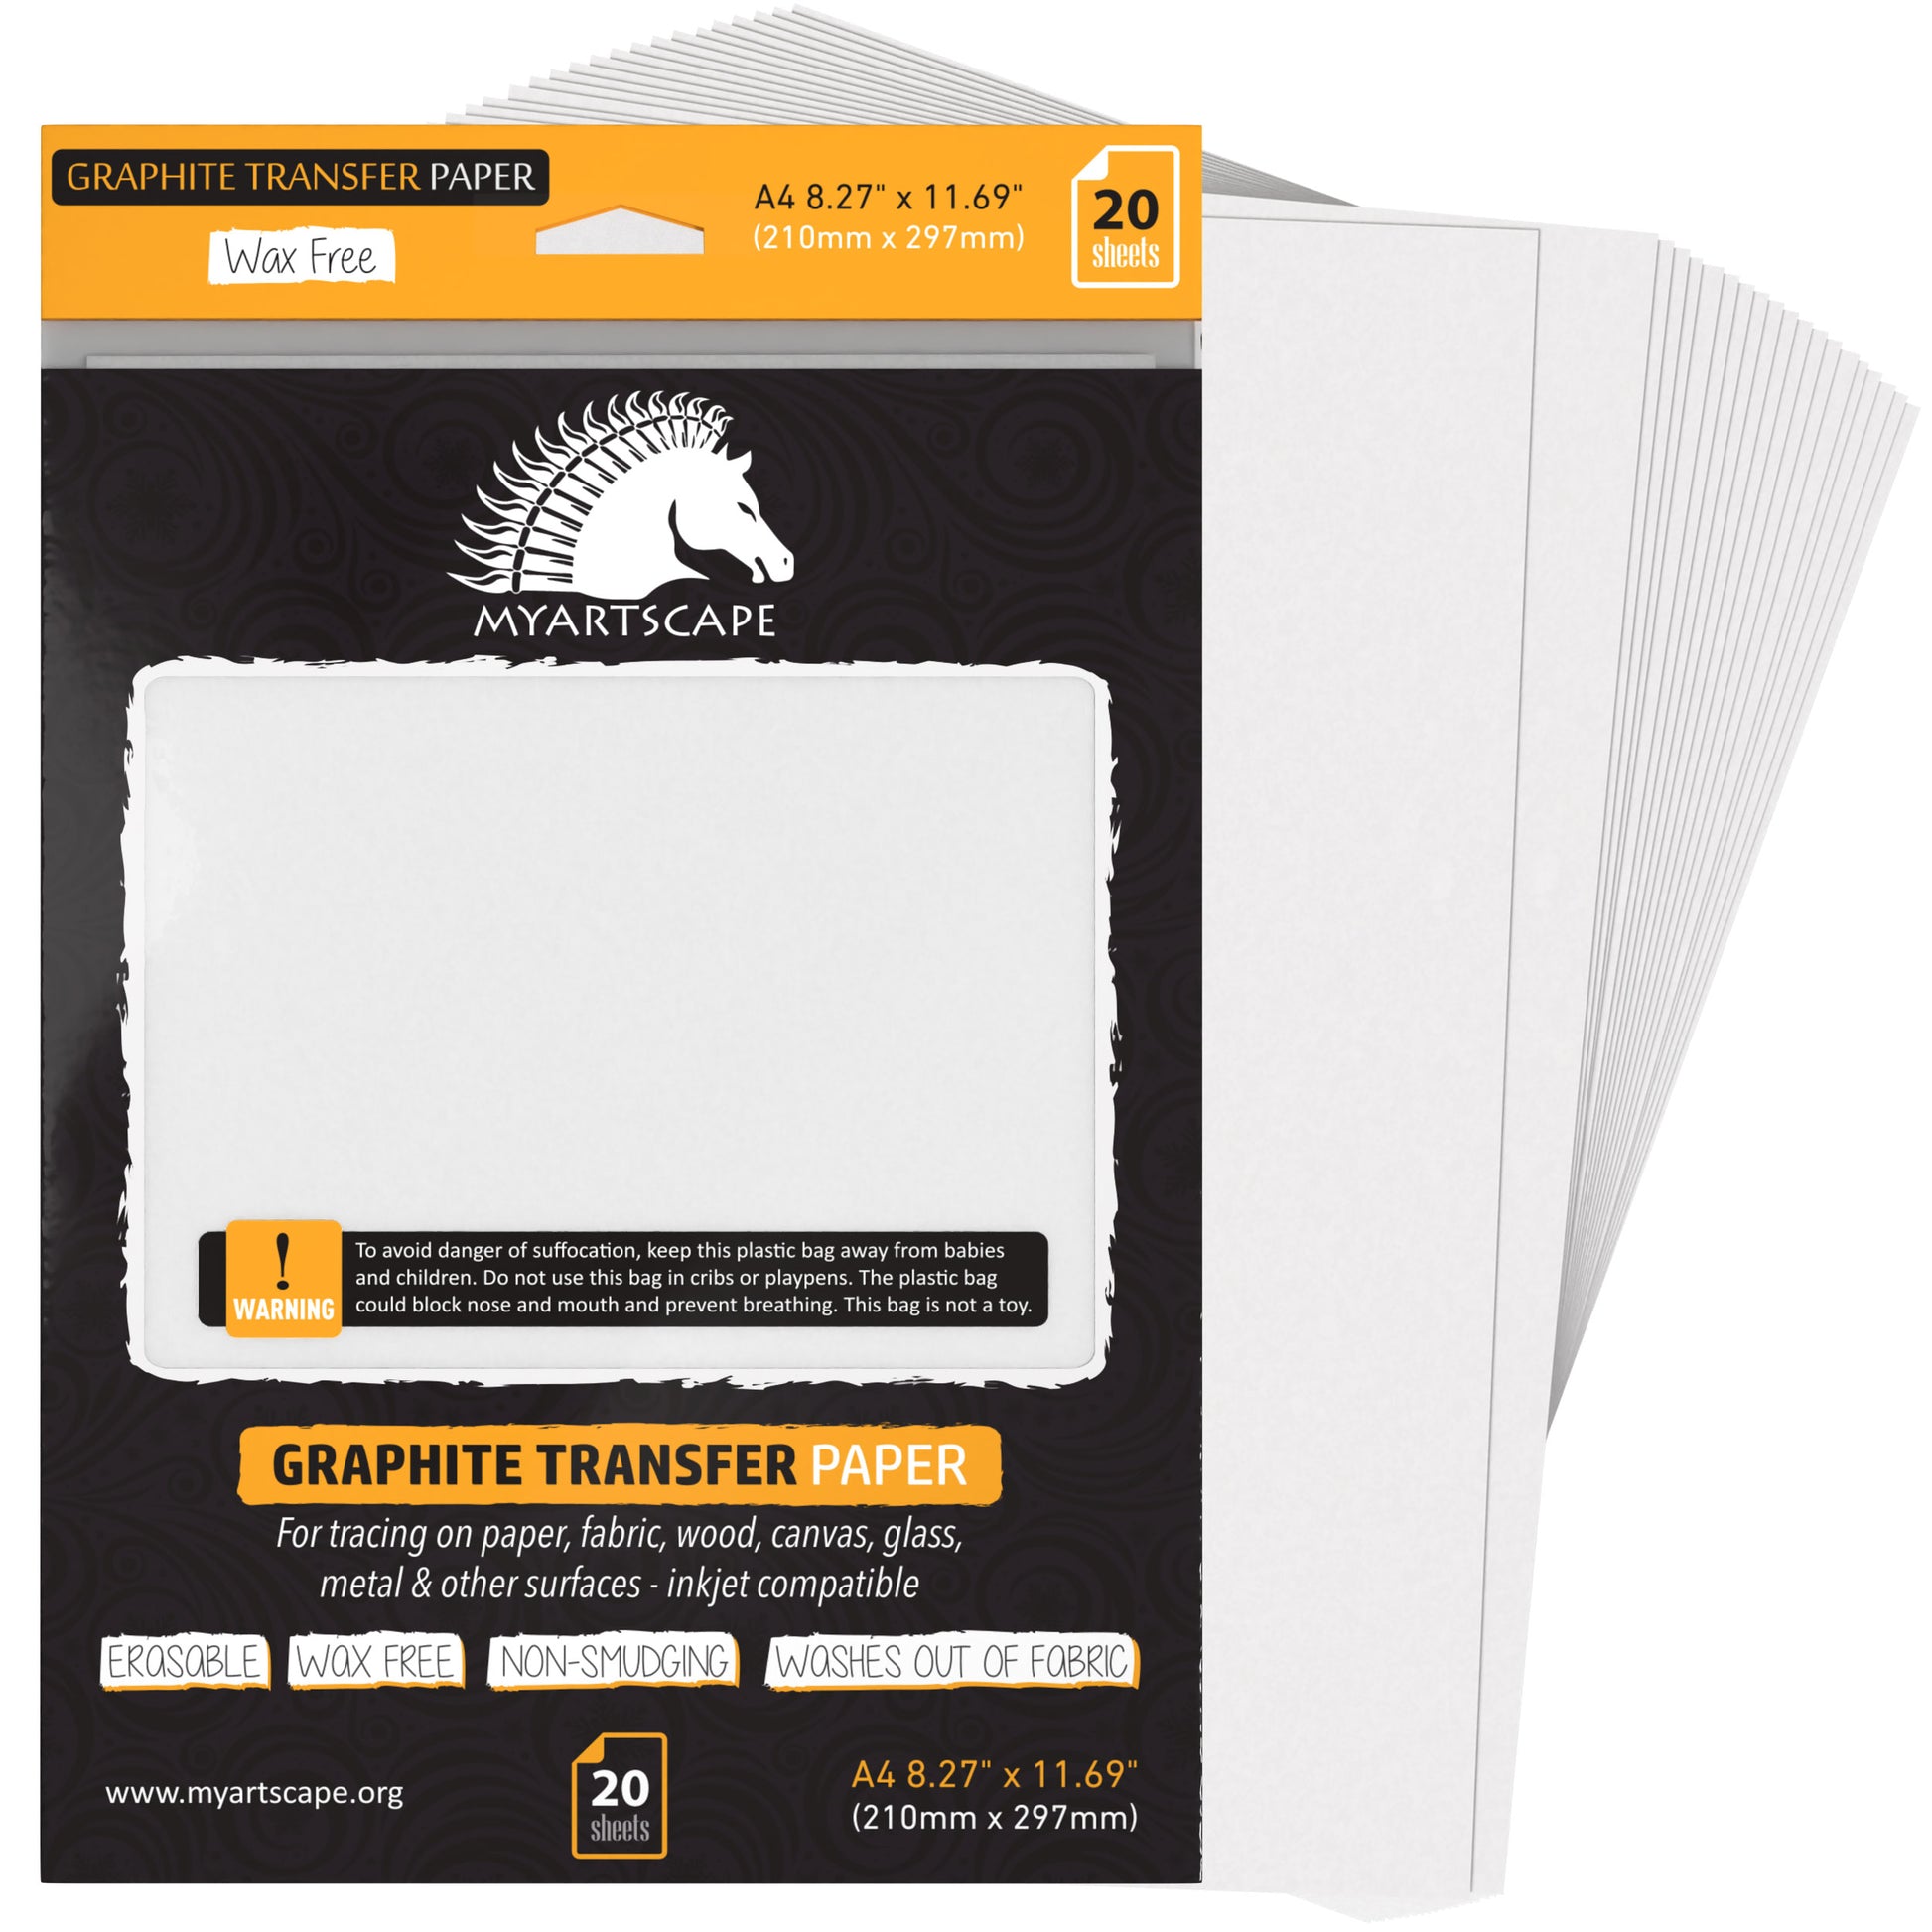 MyArtscape Graphite Transfer Paper, 20 Black Sheets - Wax Free - Erasable -  Smudge-Free - Ideal for Drawing, Tracing and Watercolor Transfer - Premium